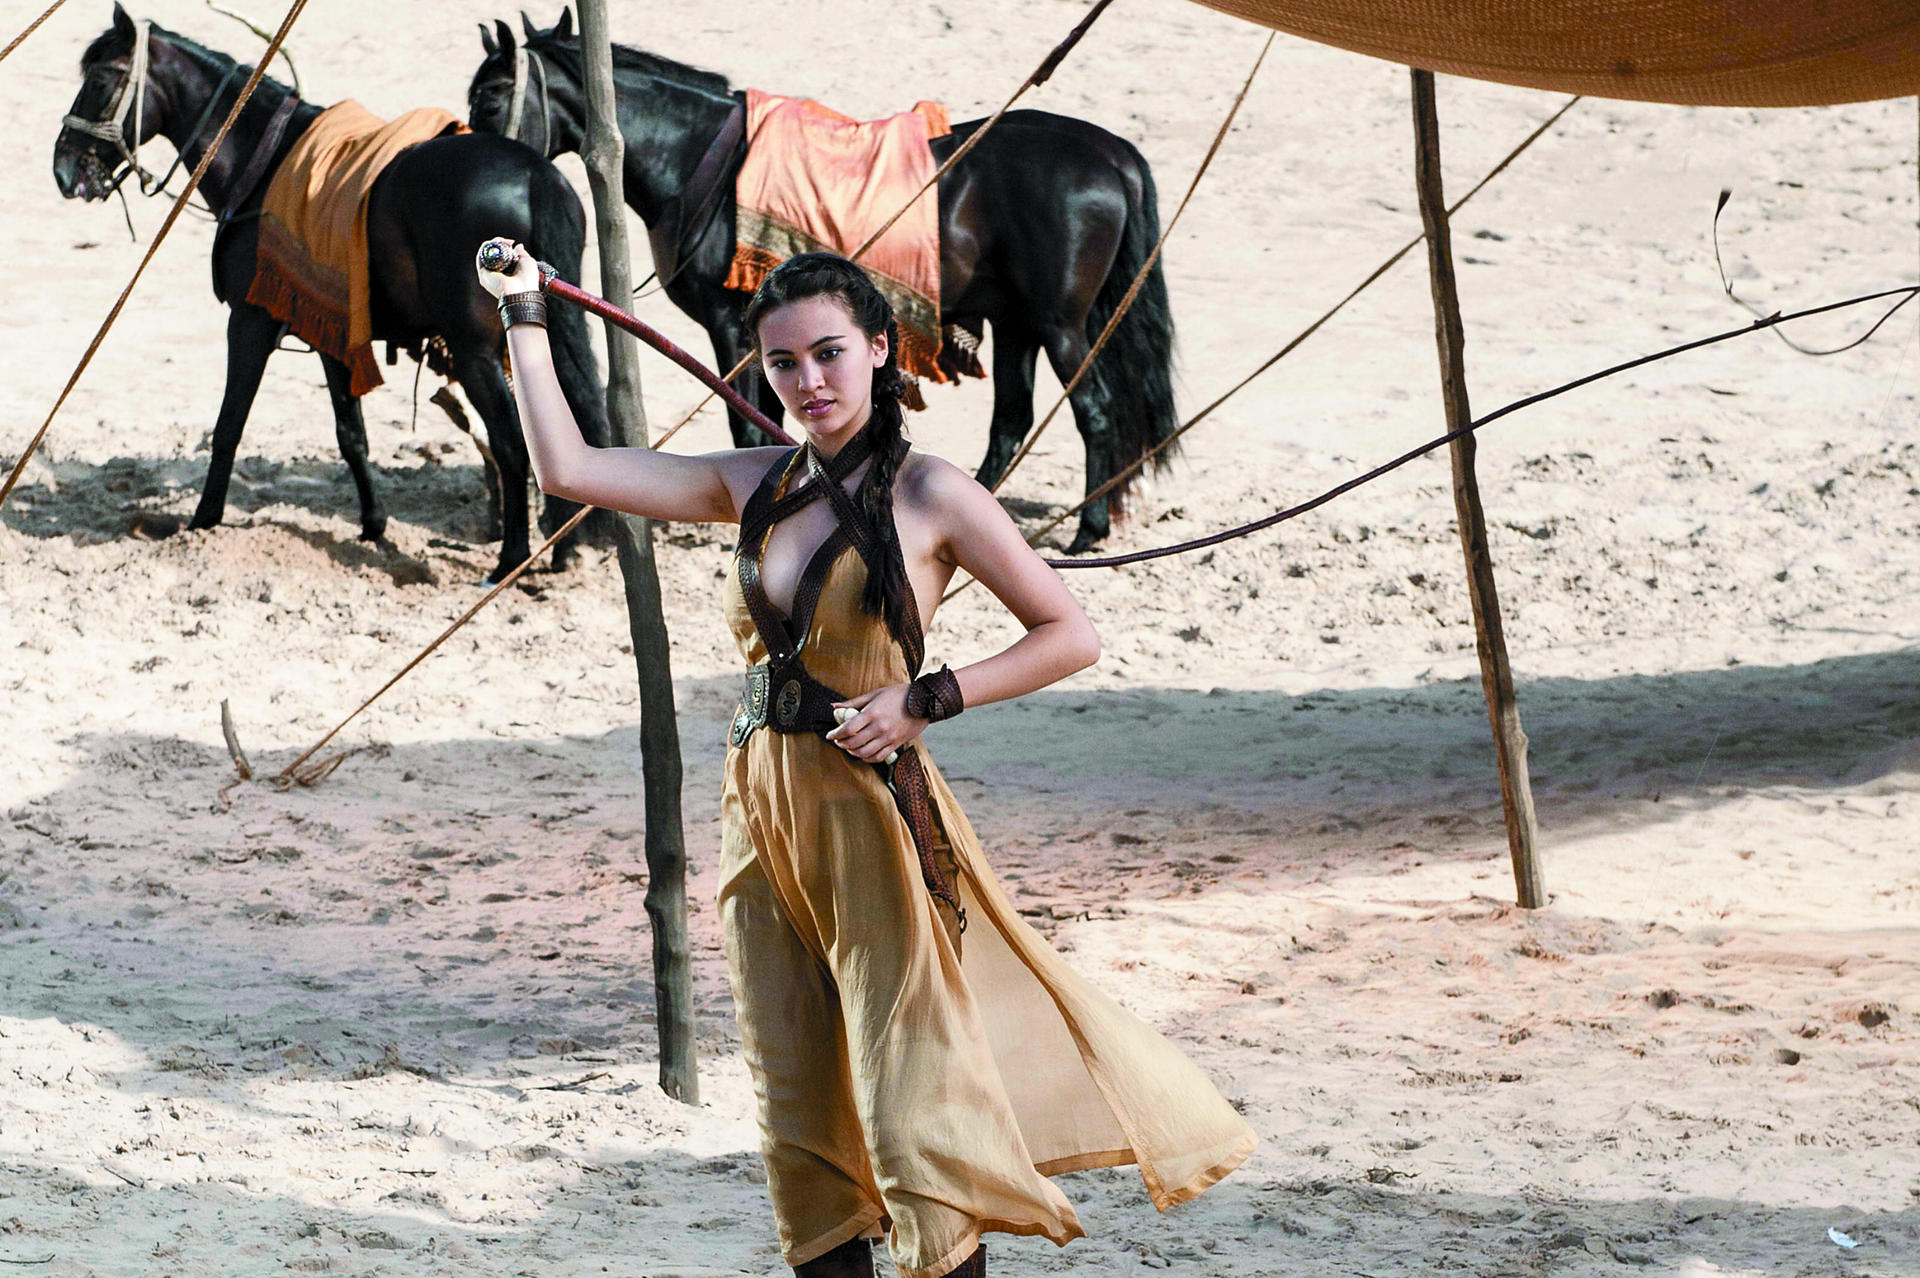 "The whip represents who Nymeria is," Henwick says of her character in the hit series.